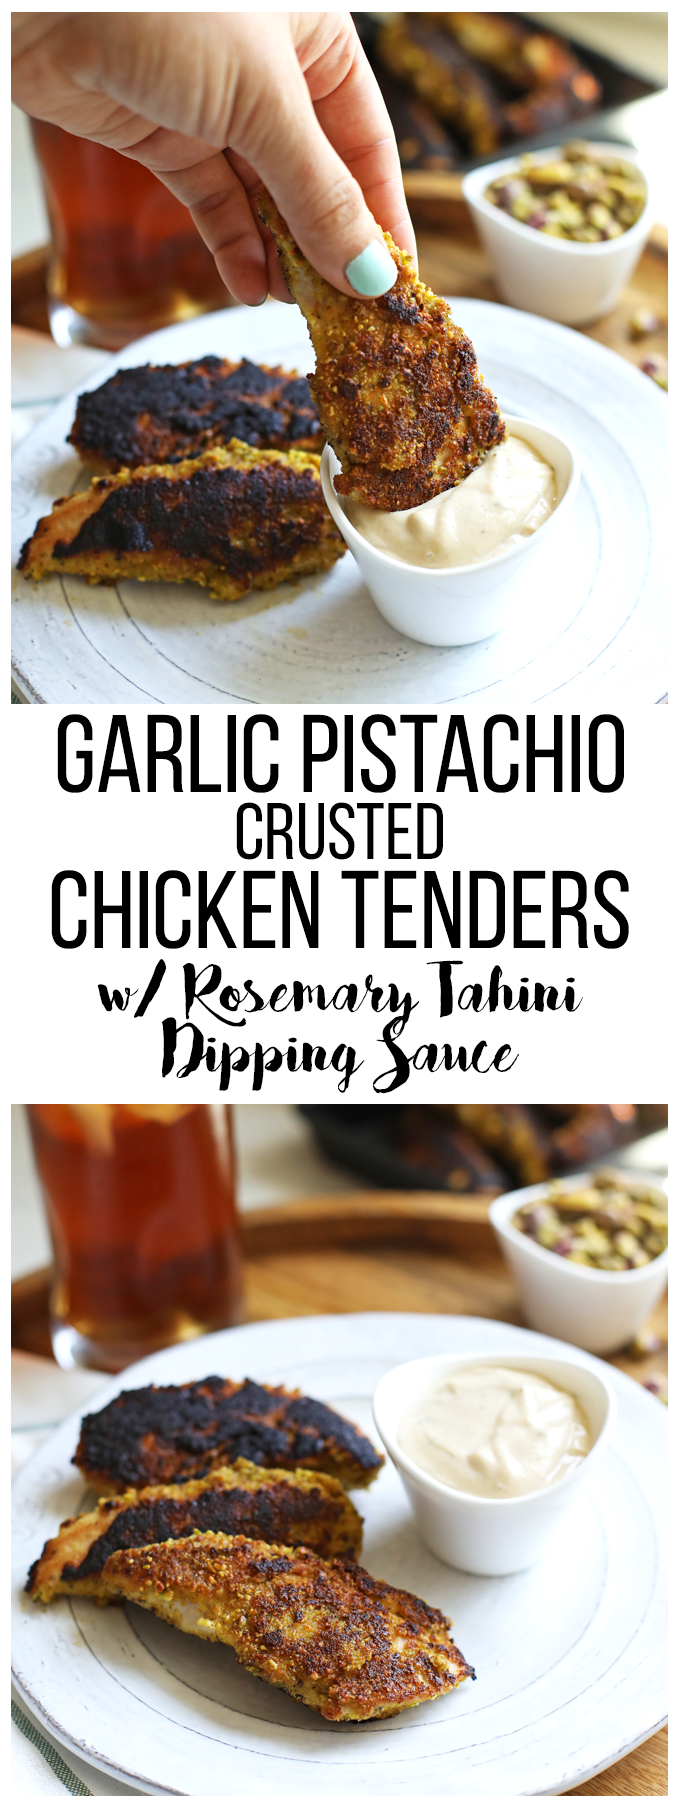 These Garlic Pistachio Chicken Tenders with Rosemary Tahini Dipping Sauce are Whole30 and perfect for kids too!